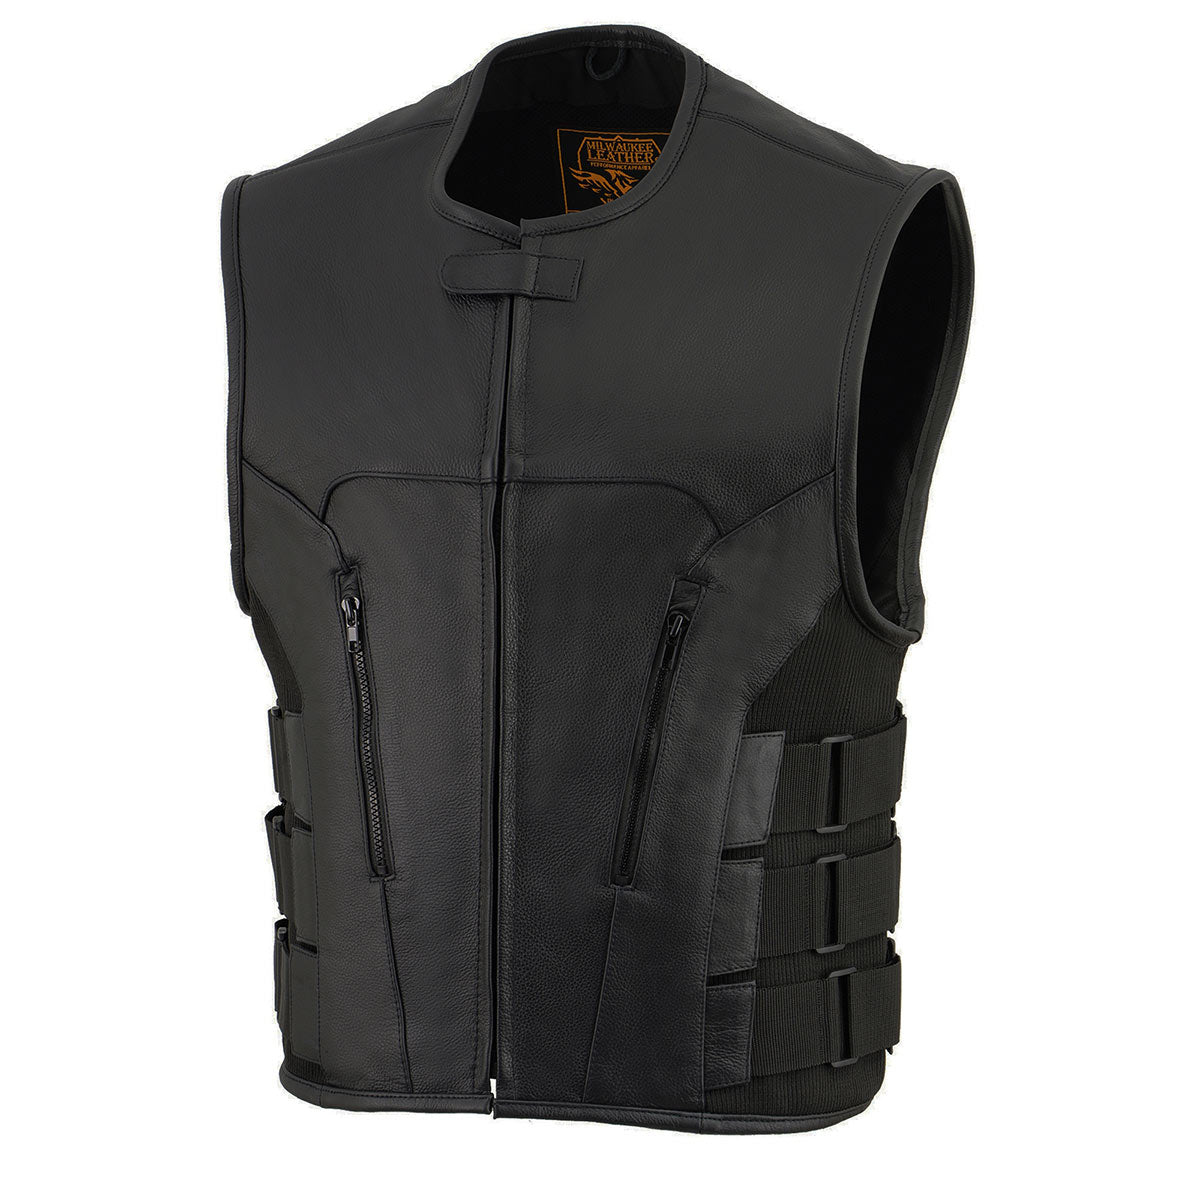 Milwaukee Leather MLM3500 Men's 'Basher' Bullet Proof Style SWAT Leather Vest w/ Single Panel Back for Patches